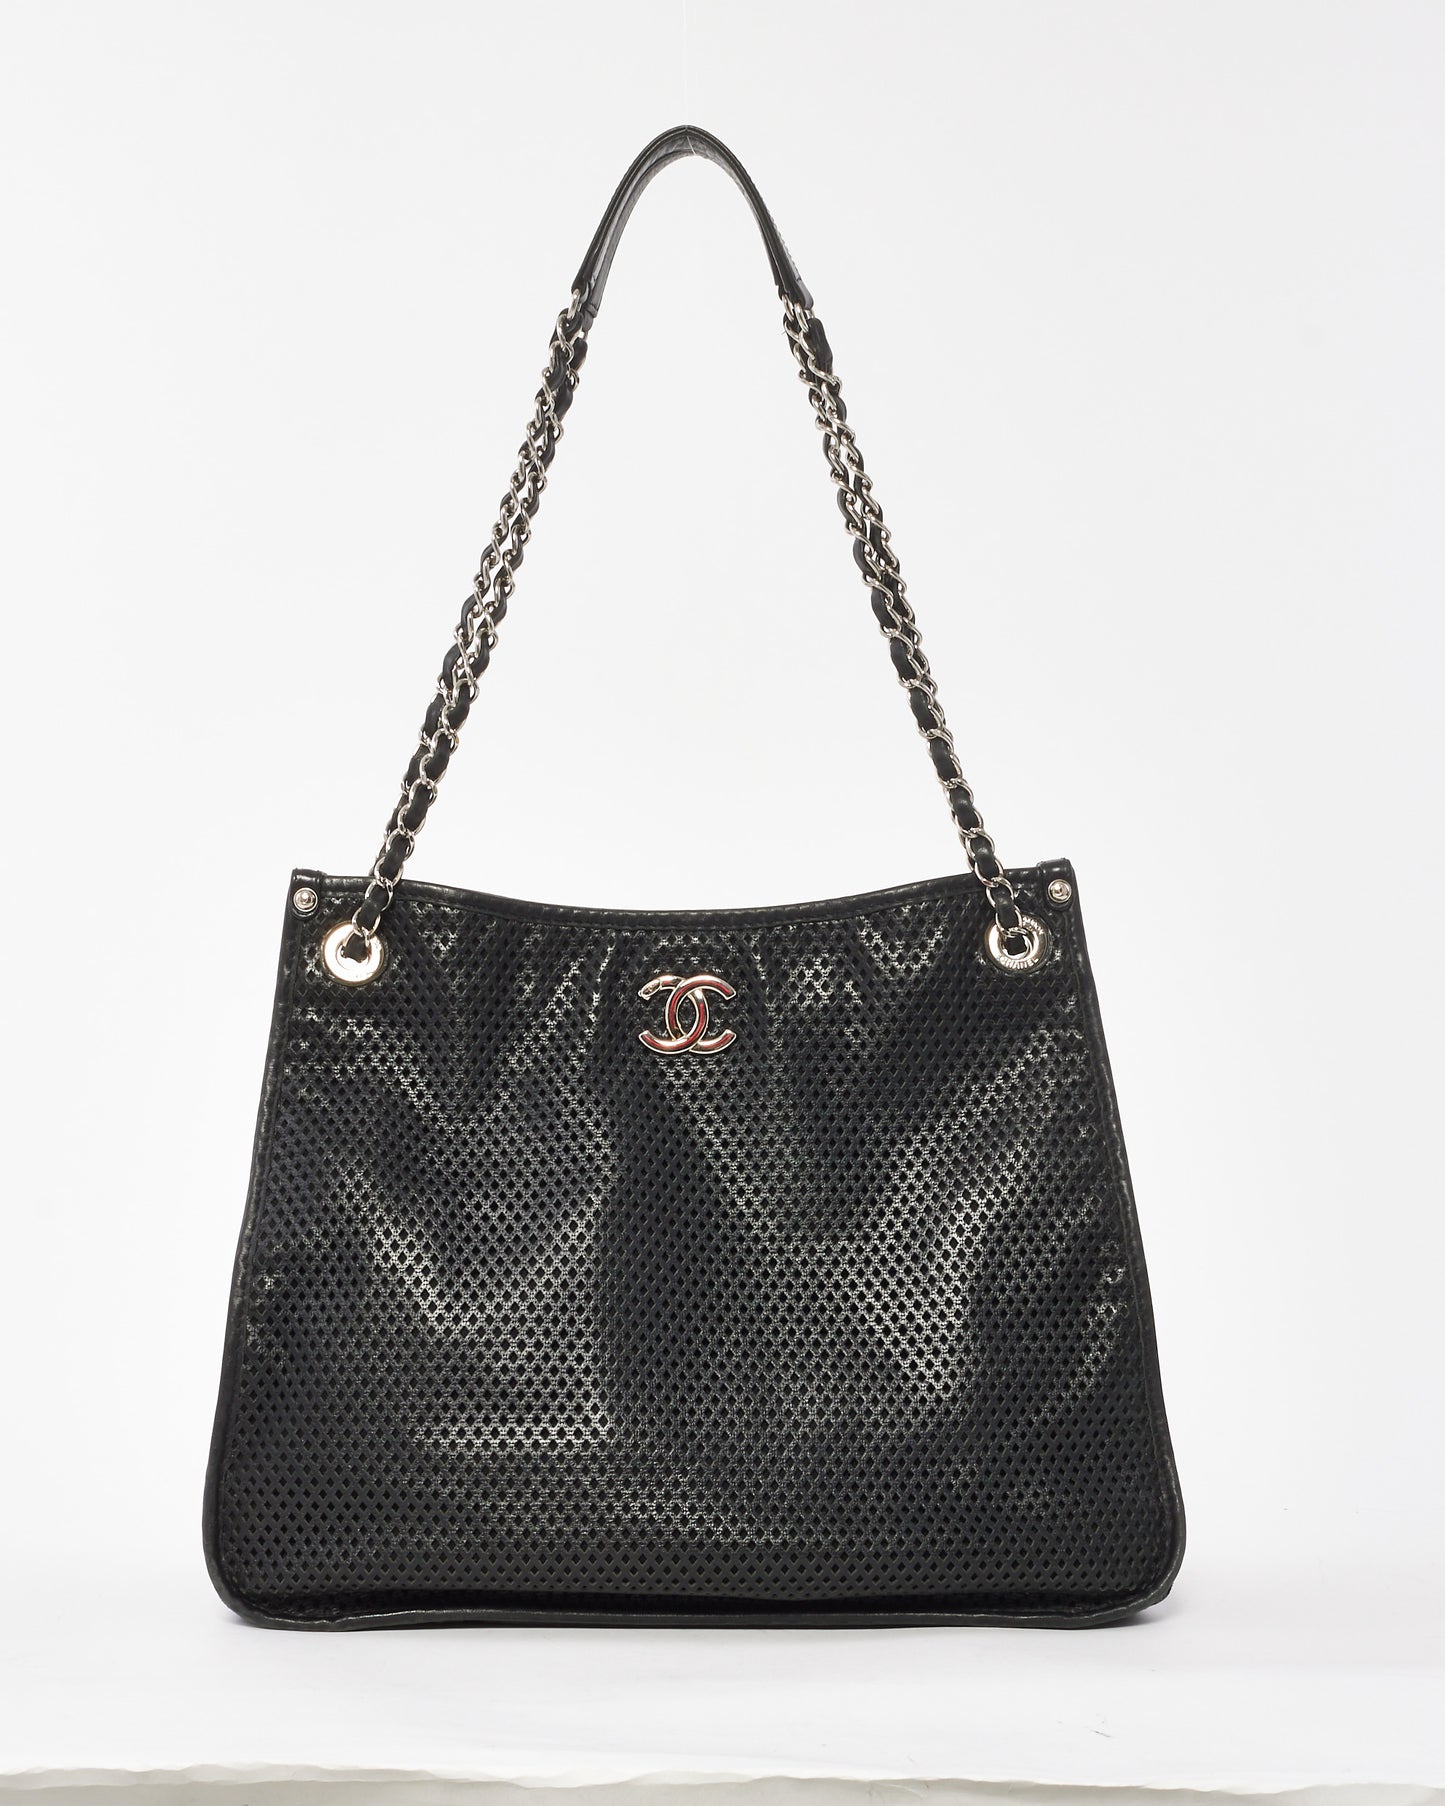 Chanel Black Perforated Leather CC Logo Tote Bag